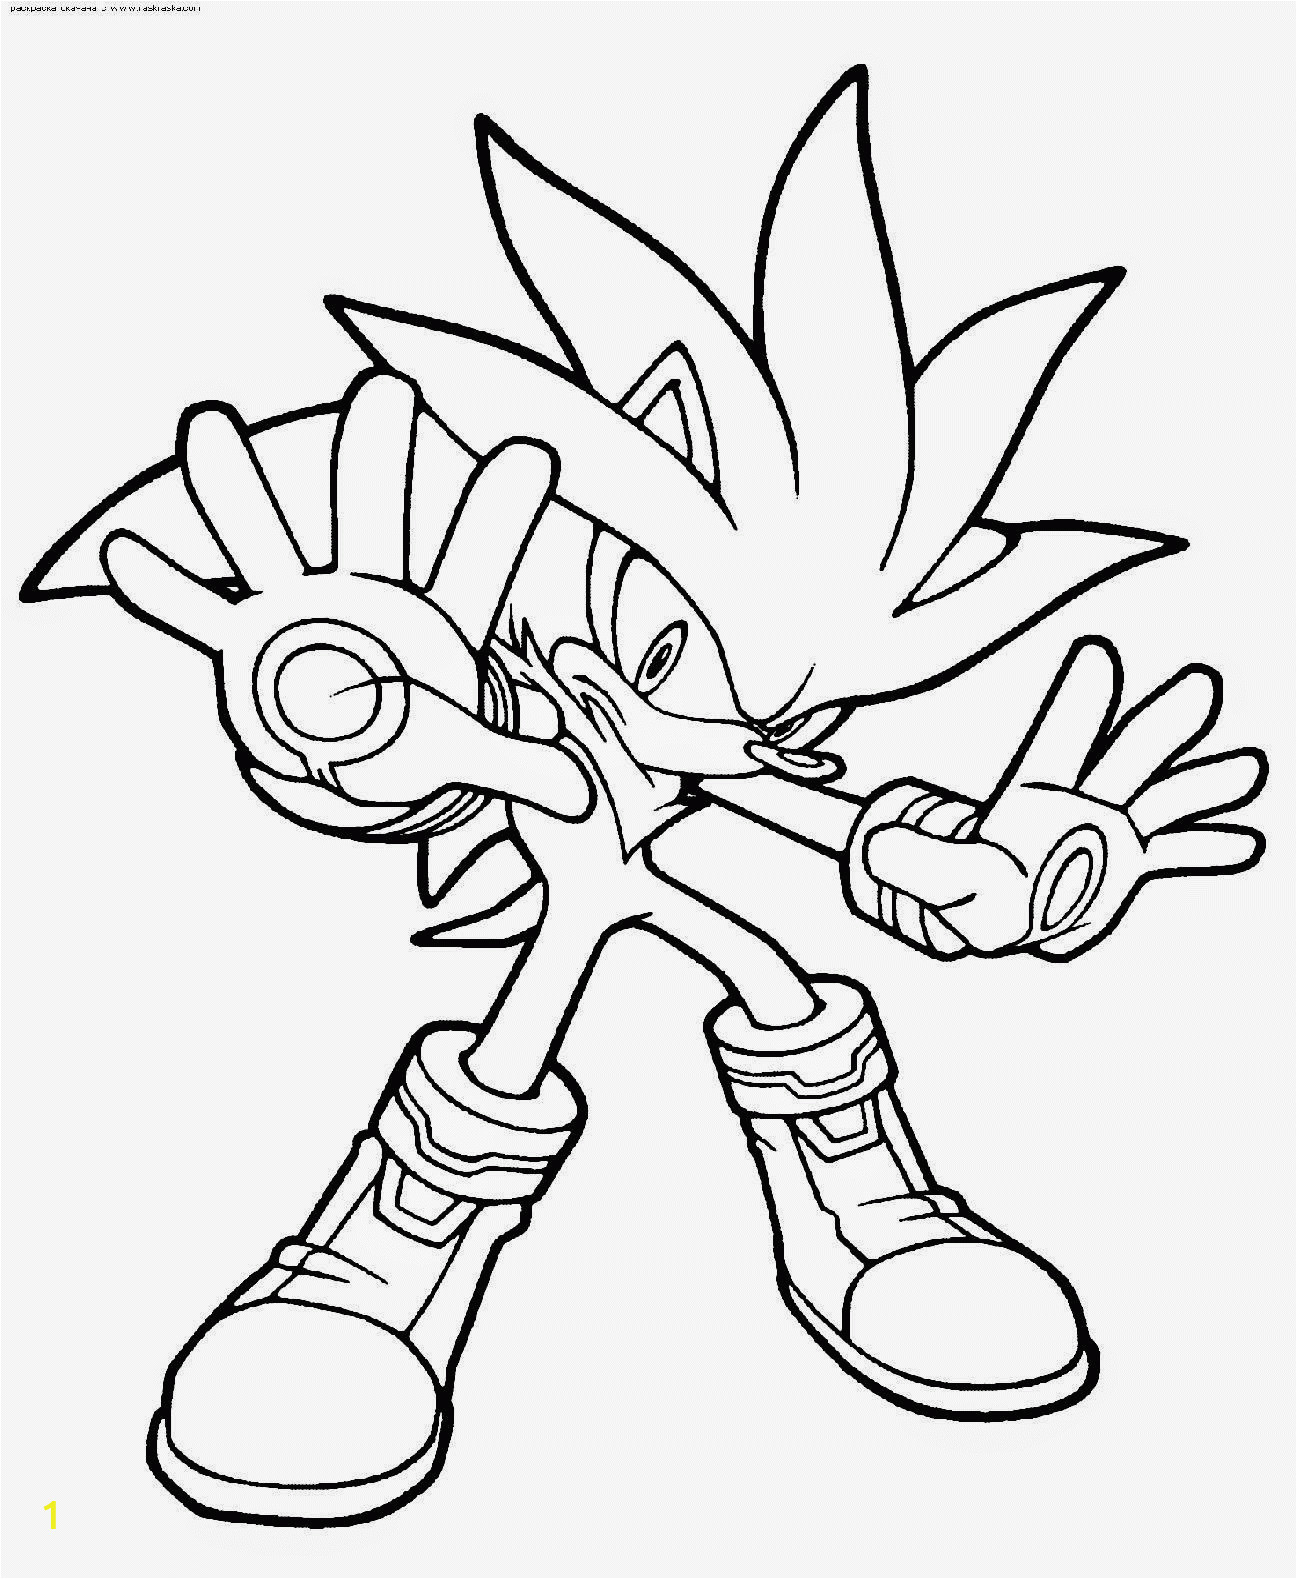 Shadow the Hedgehog Coloring Pages Online Shadow the Hedgehog Coloring Page Coloring Home